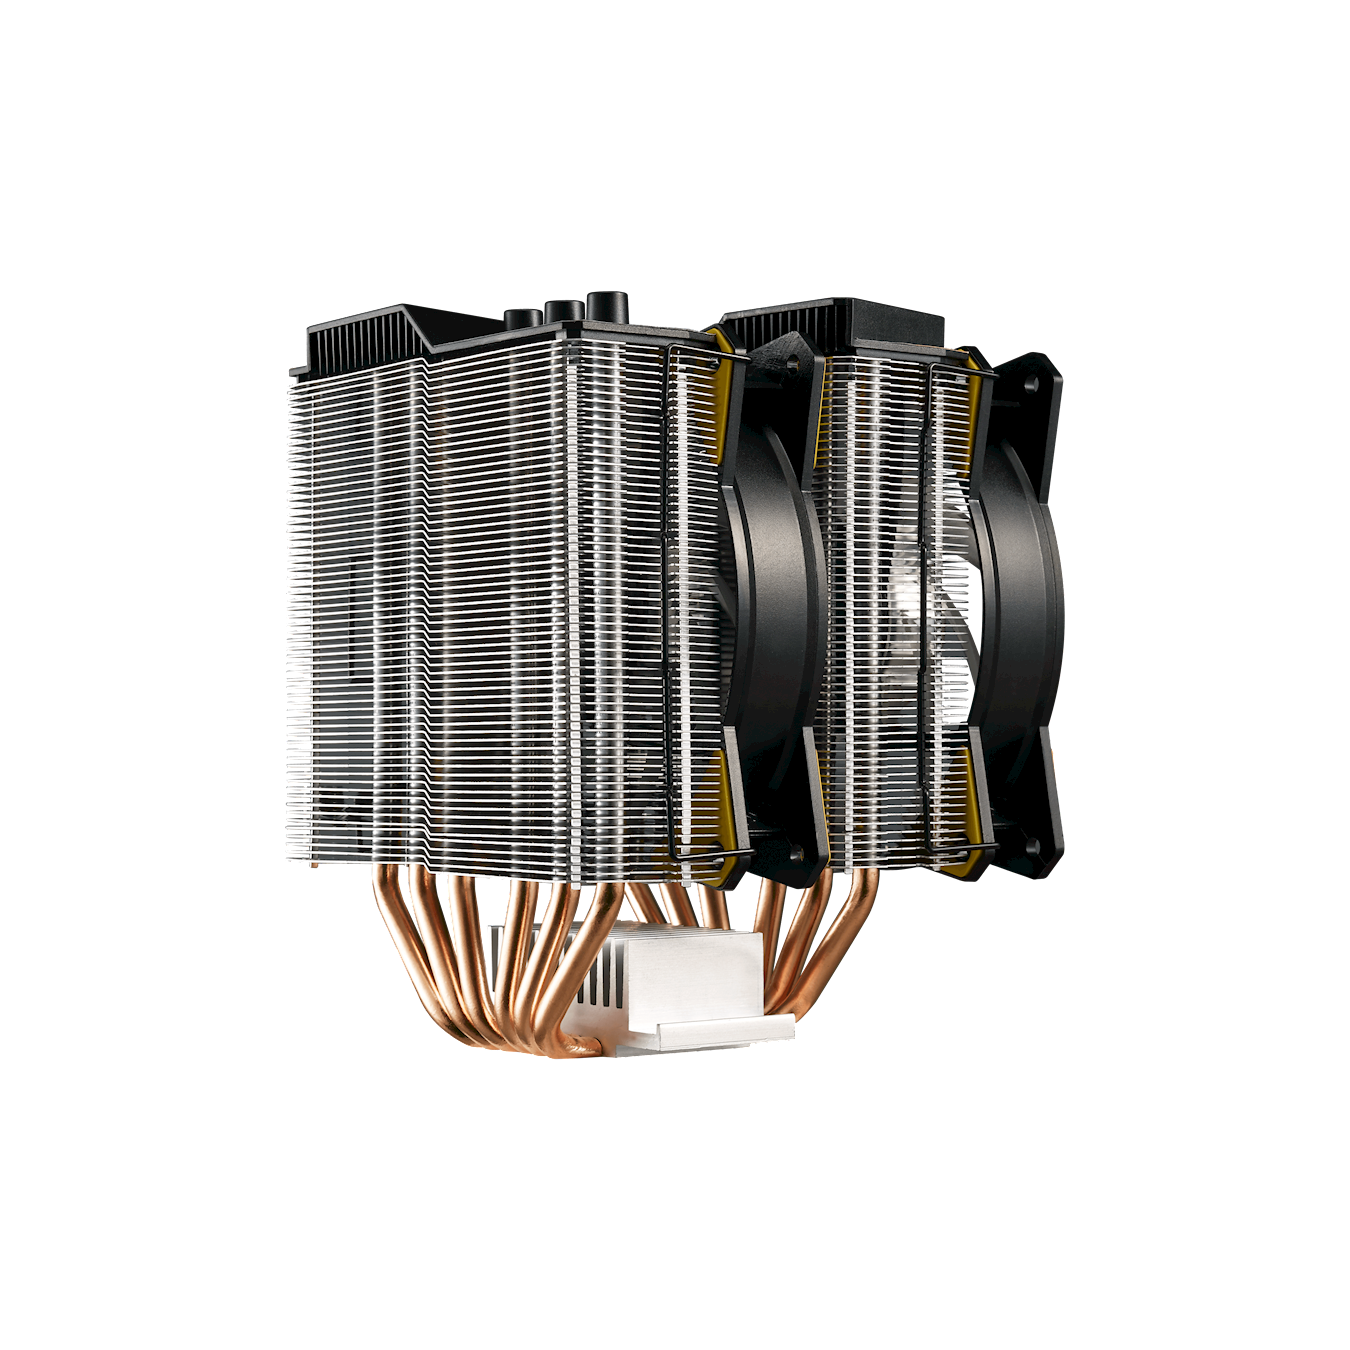 MasterAir MA620P TUF - With 6 heatpipes and Continuous Direct Contact Technology 2.0 (CDC 2.0)